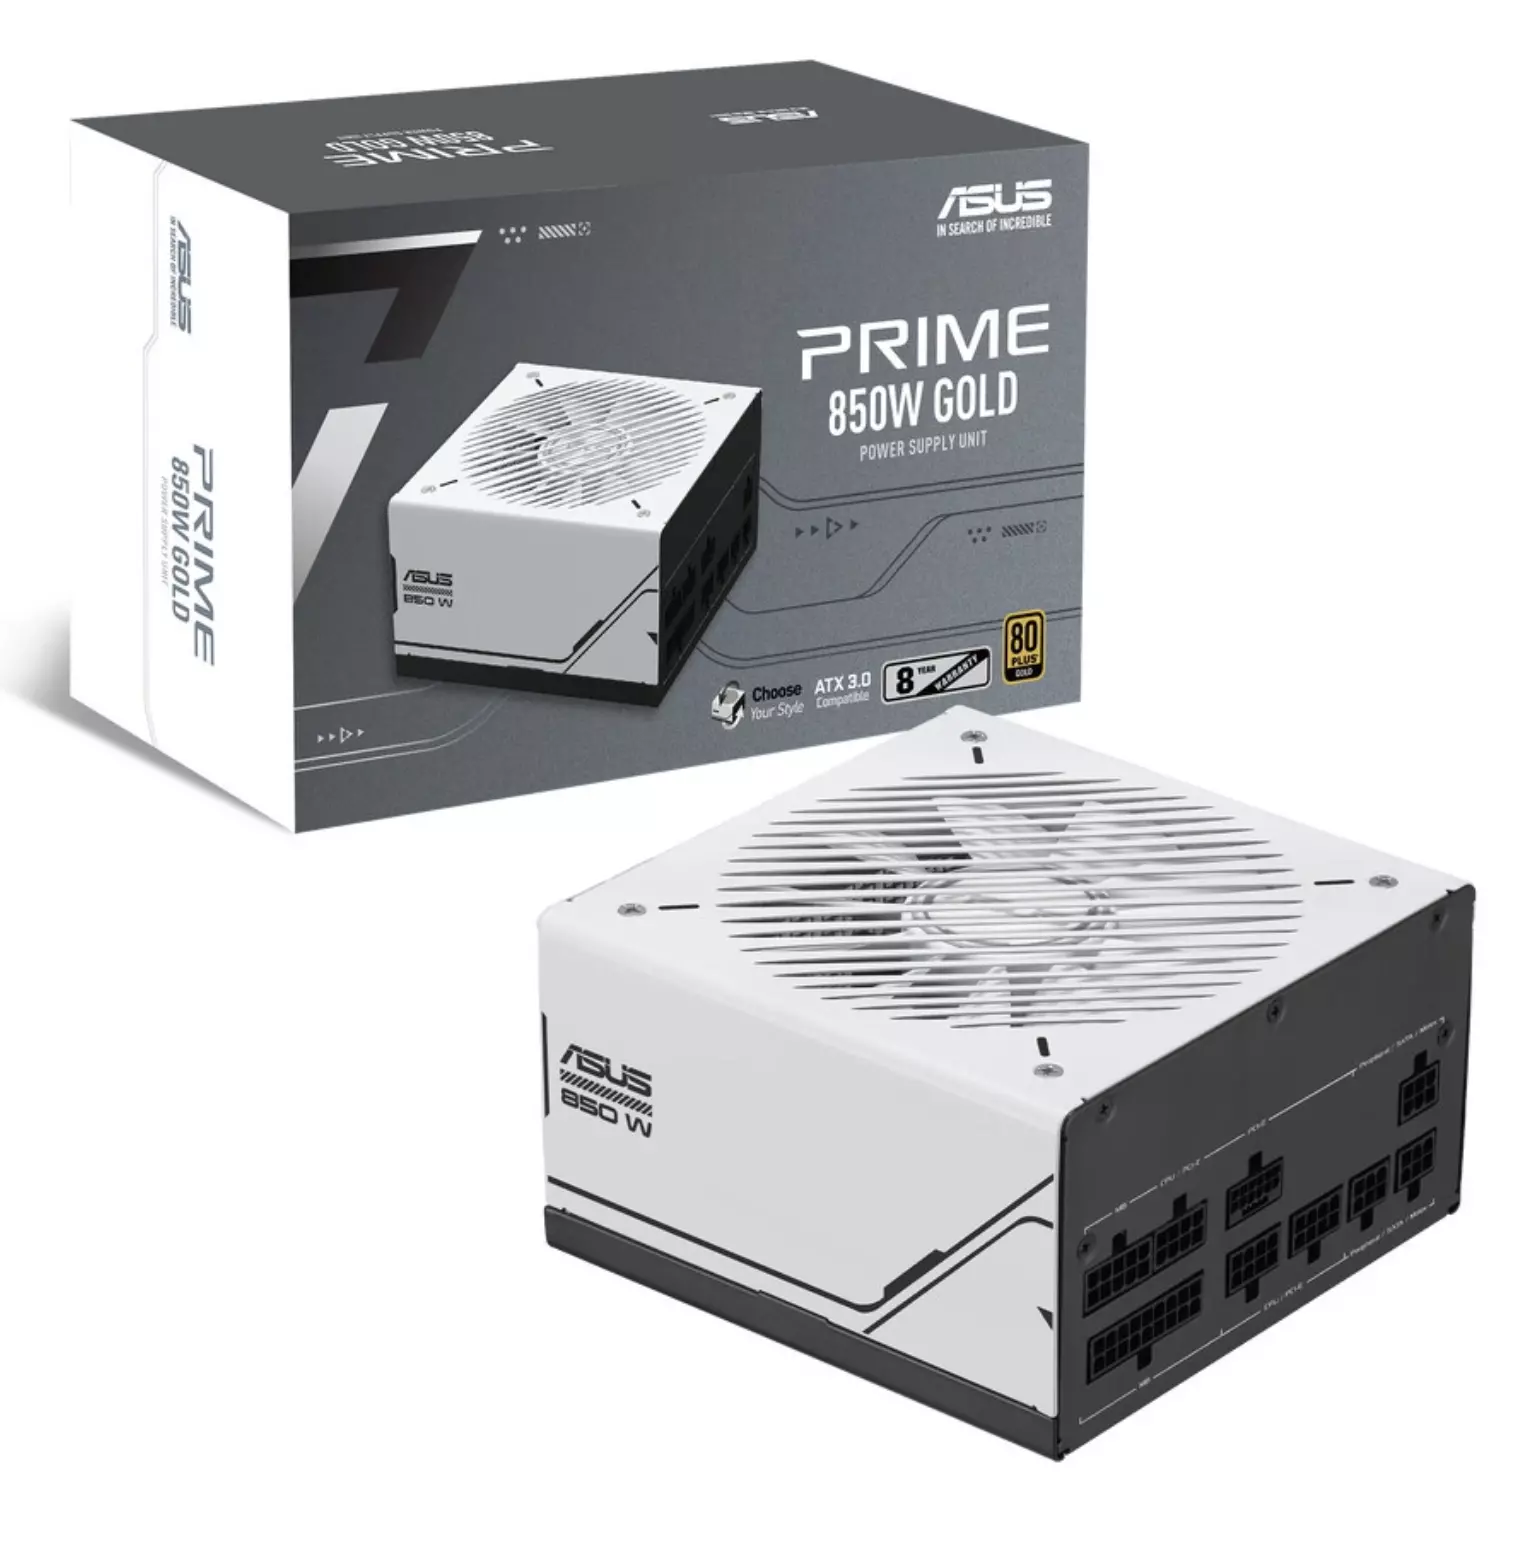 asus prime 850w gold power supply